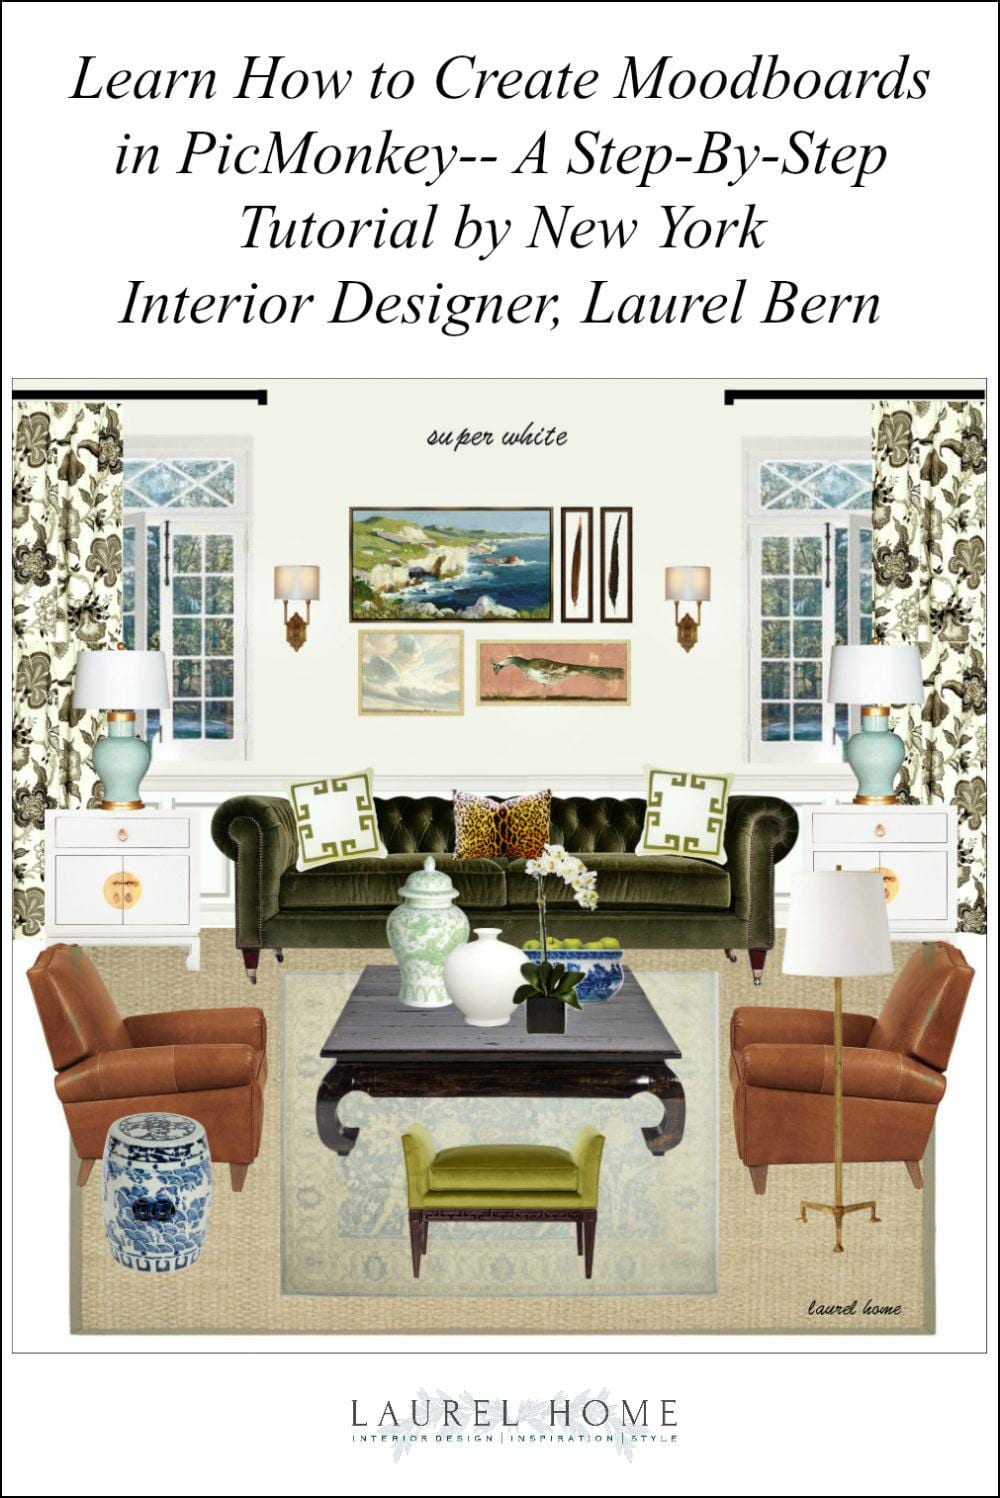 learn how to create moodboards in picmonkey - a step-by-step tutorial by New York Interior Designer, Laurel Bern